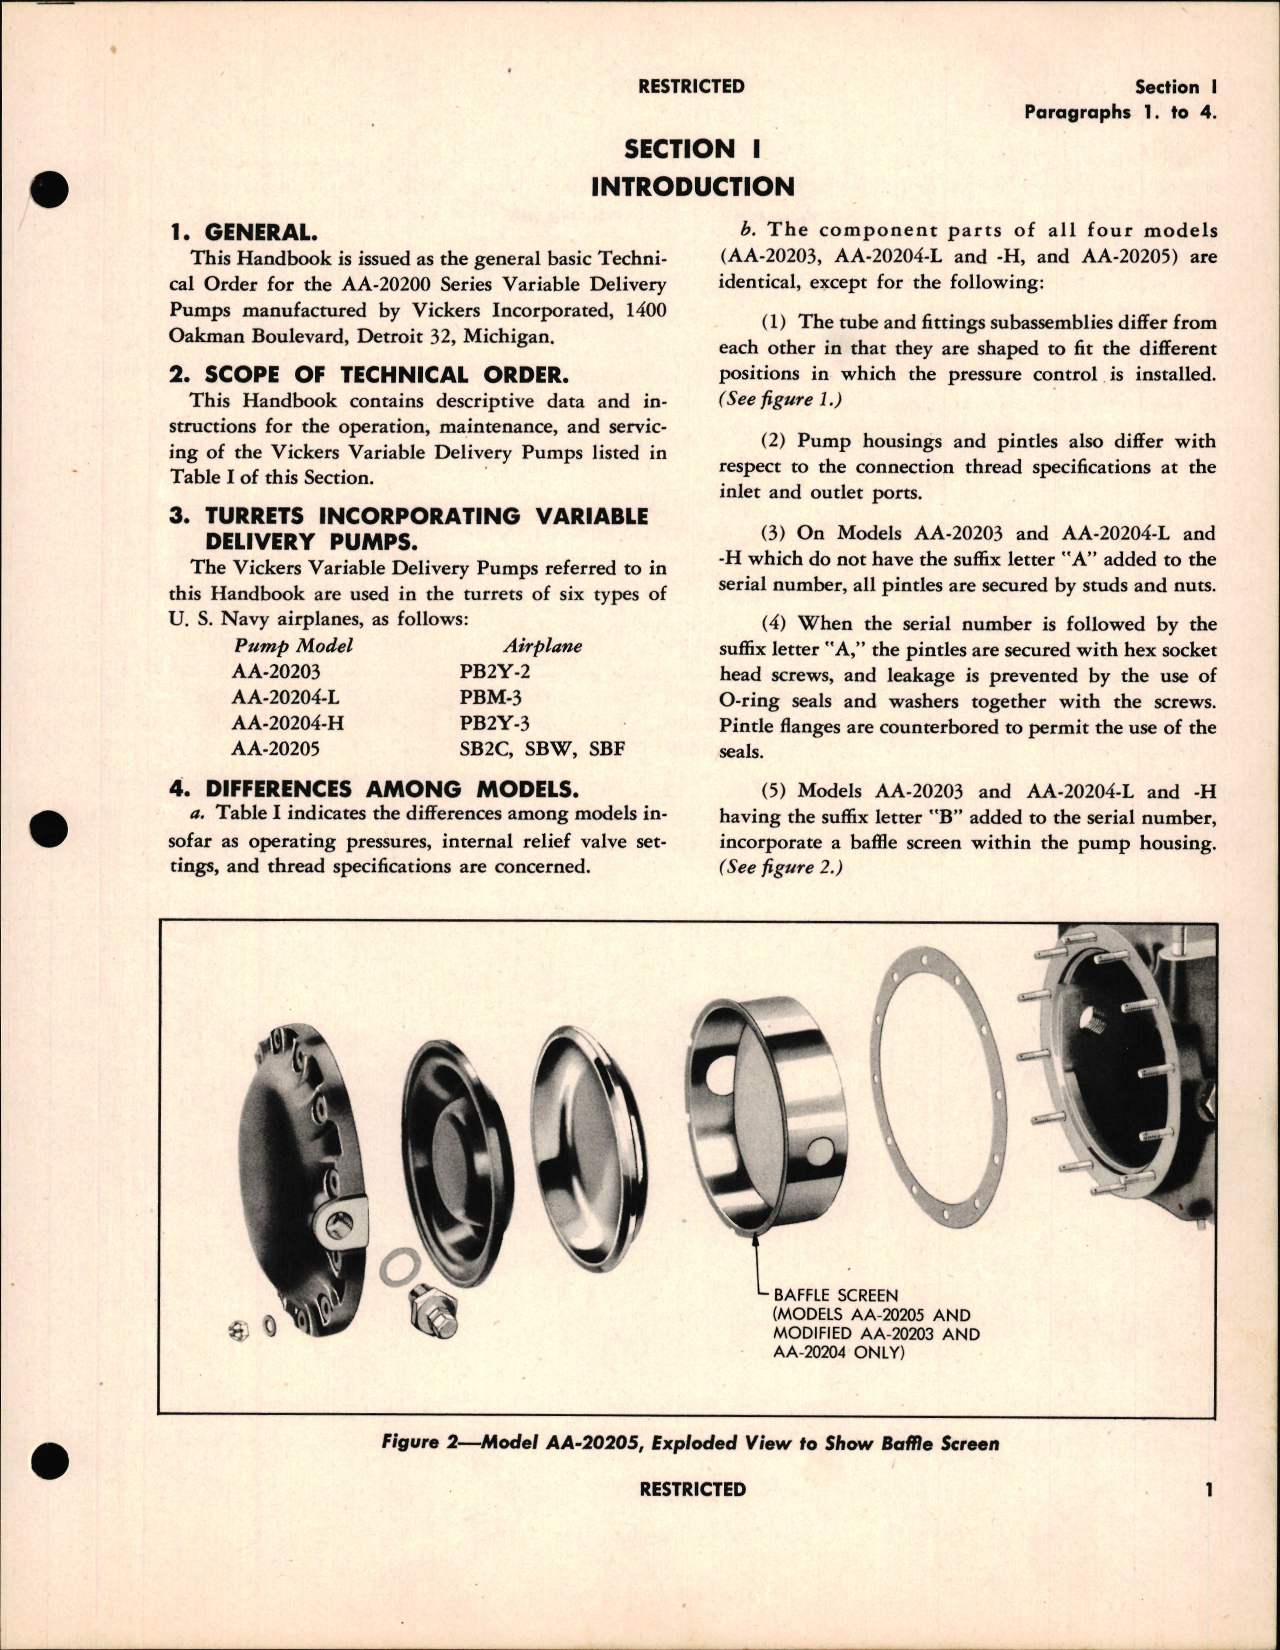 Sample page 7 from AirCorps Library document: Handbook of Instructions with Parts Catalog for Variable Delivery Pumps AA-20200 Series